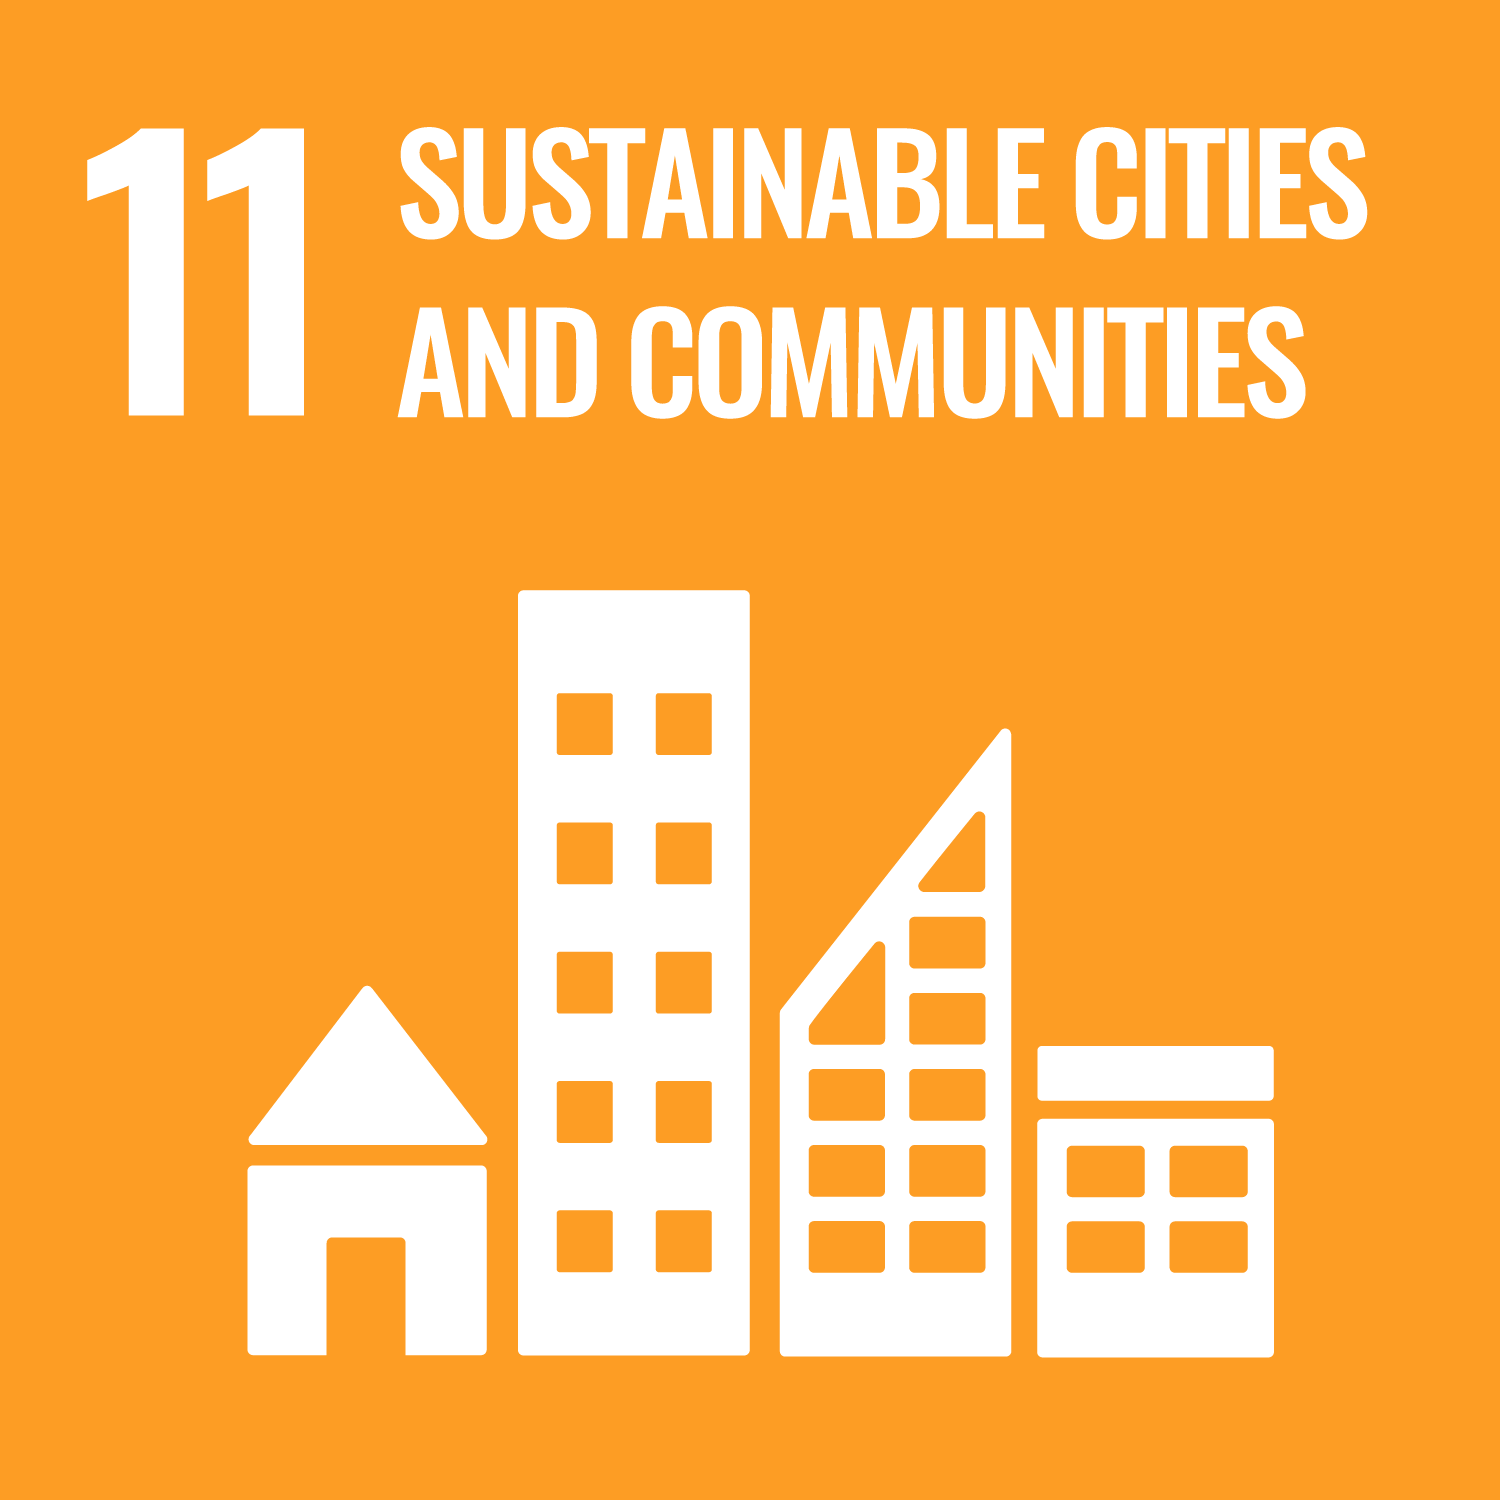 11 SUSTAINABLE AND COMMUNITIES